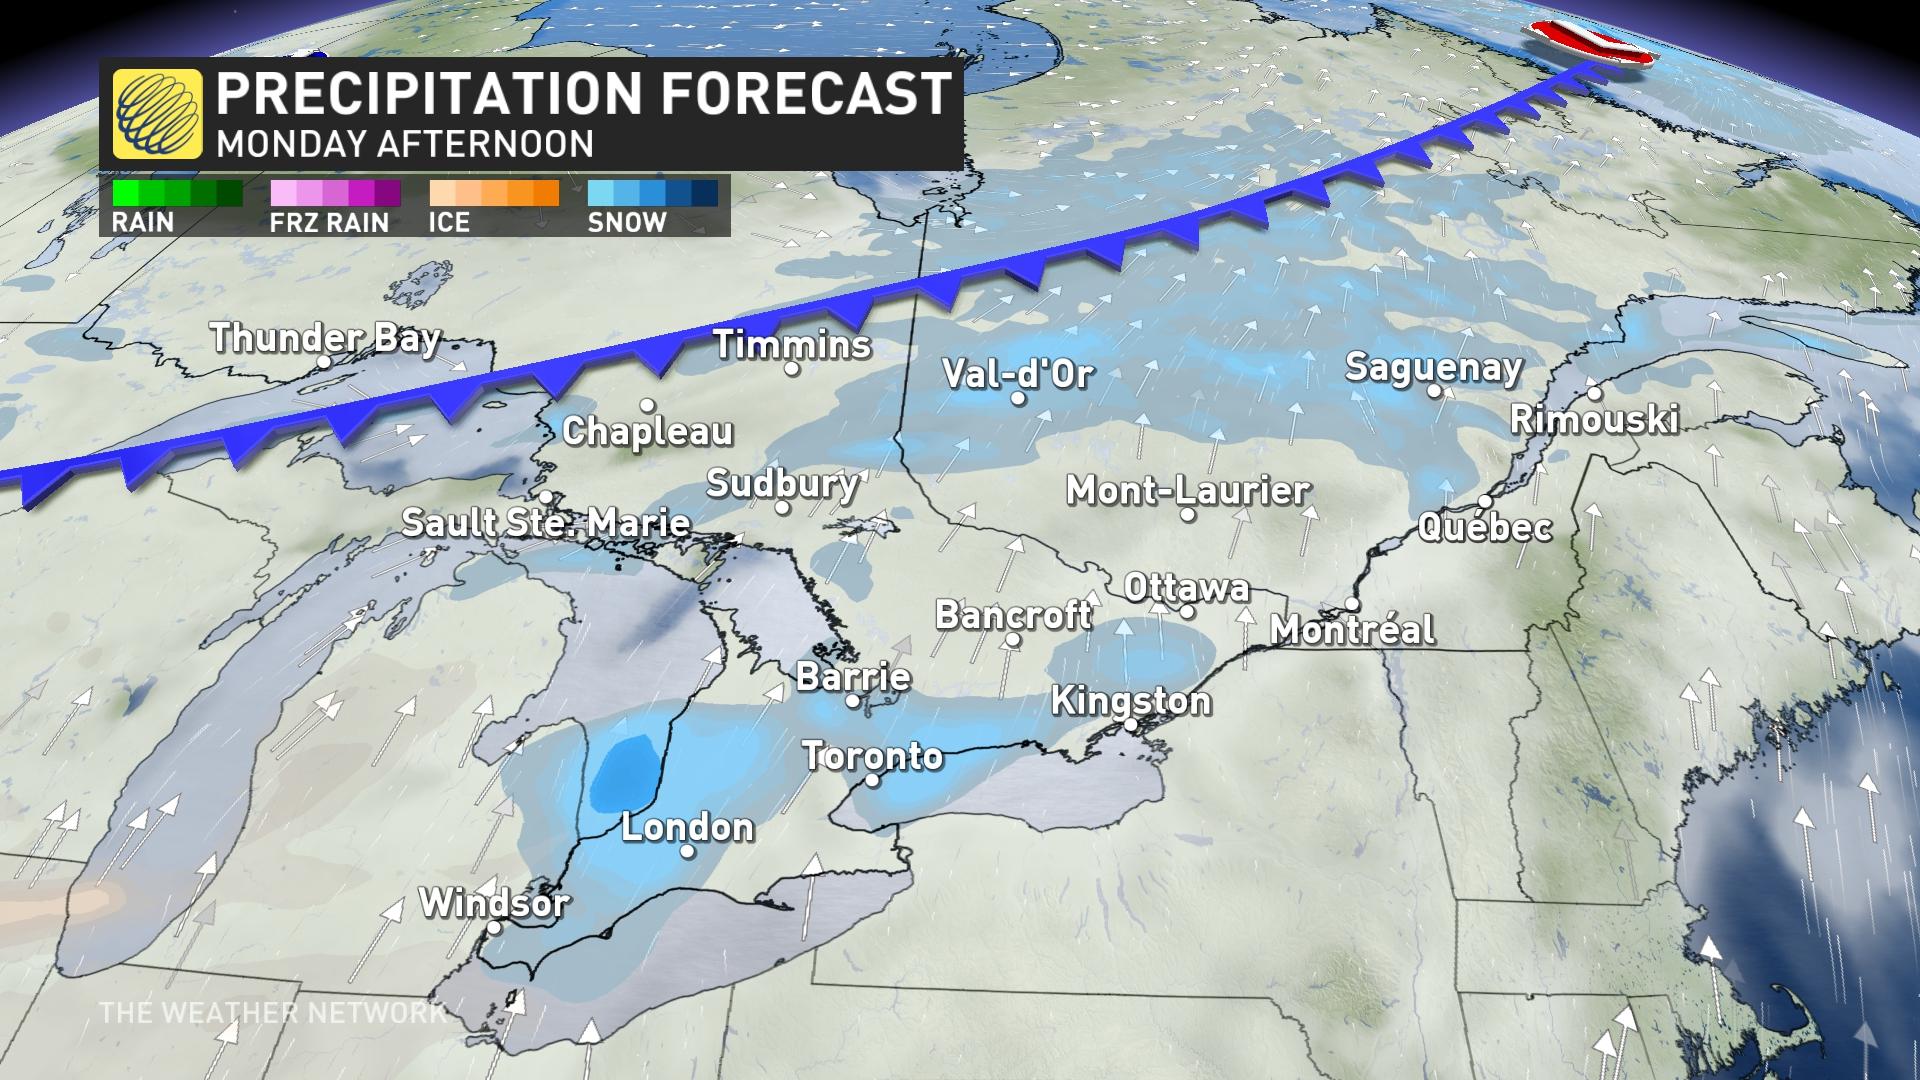 milder air returns to ontario with a burst of messy, disruptive weather